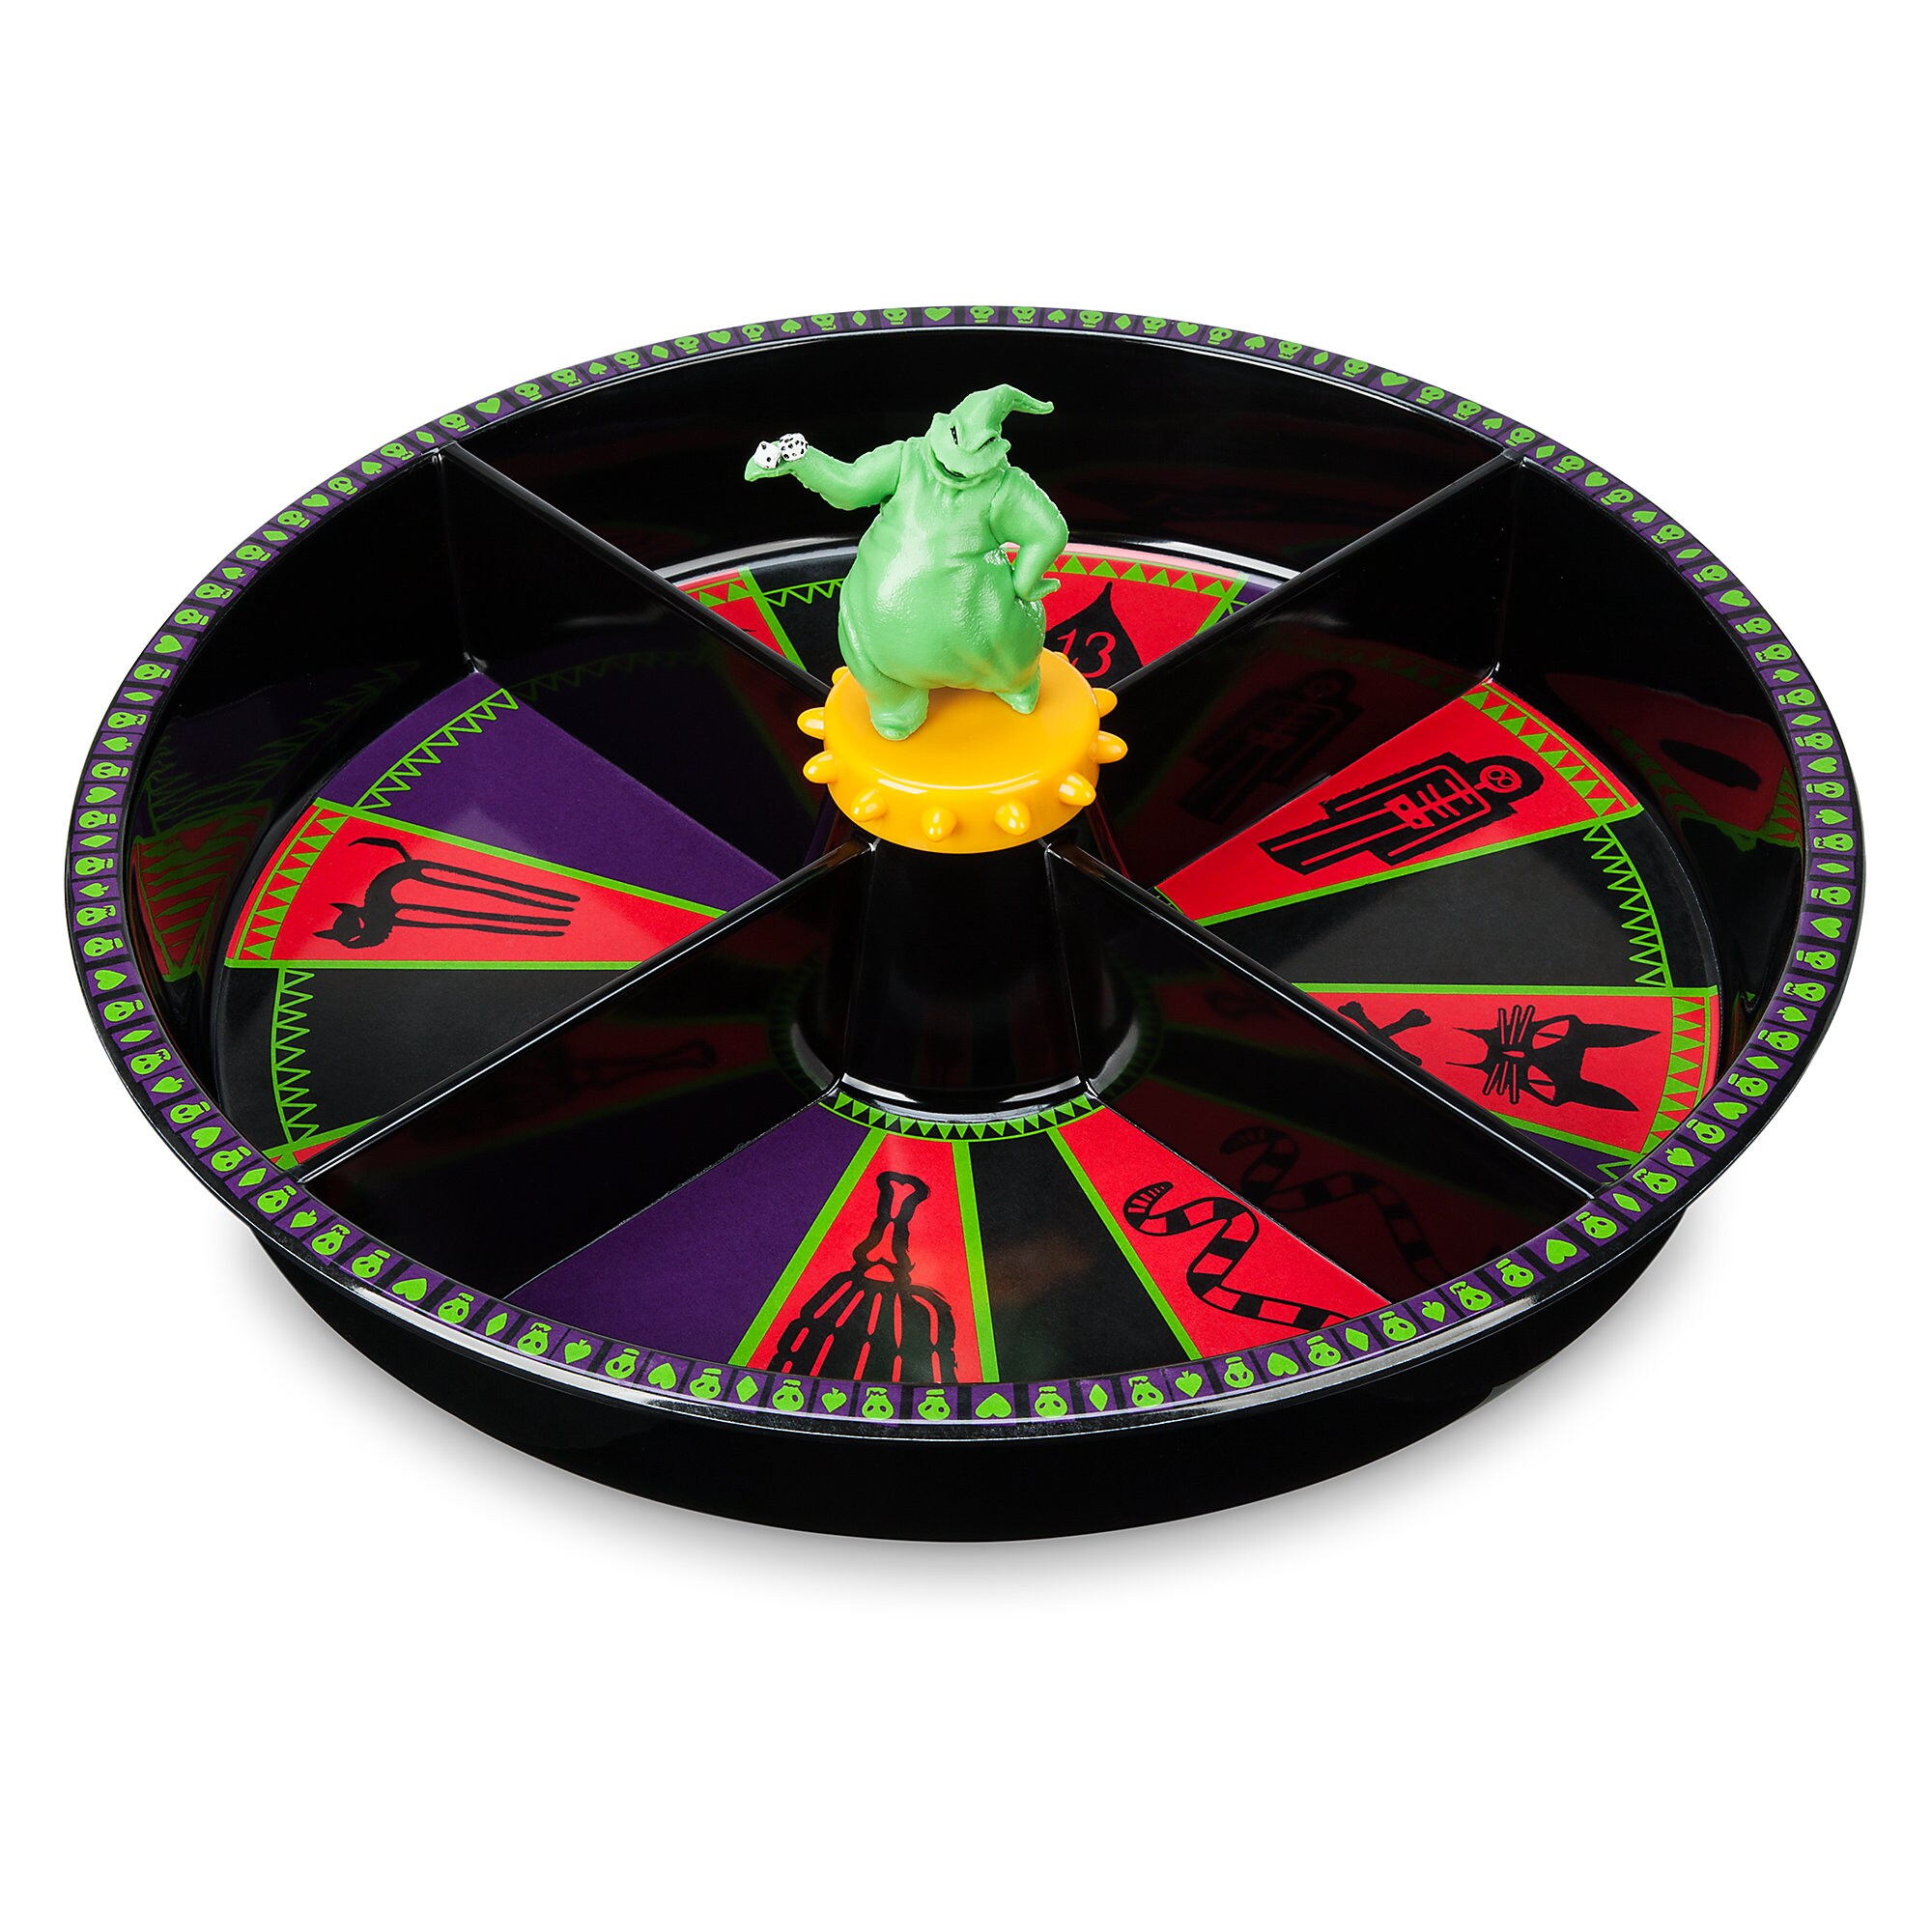 Oogie Boogie Roulette Candy Dish - The Nightmare Before Christmas